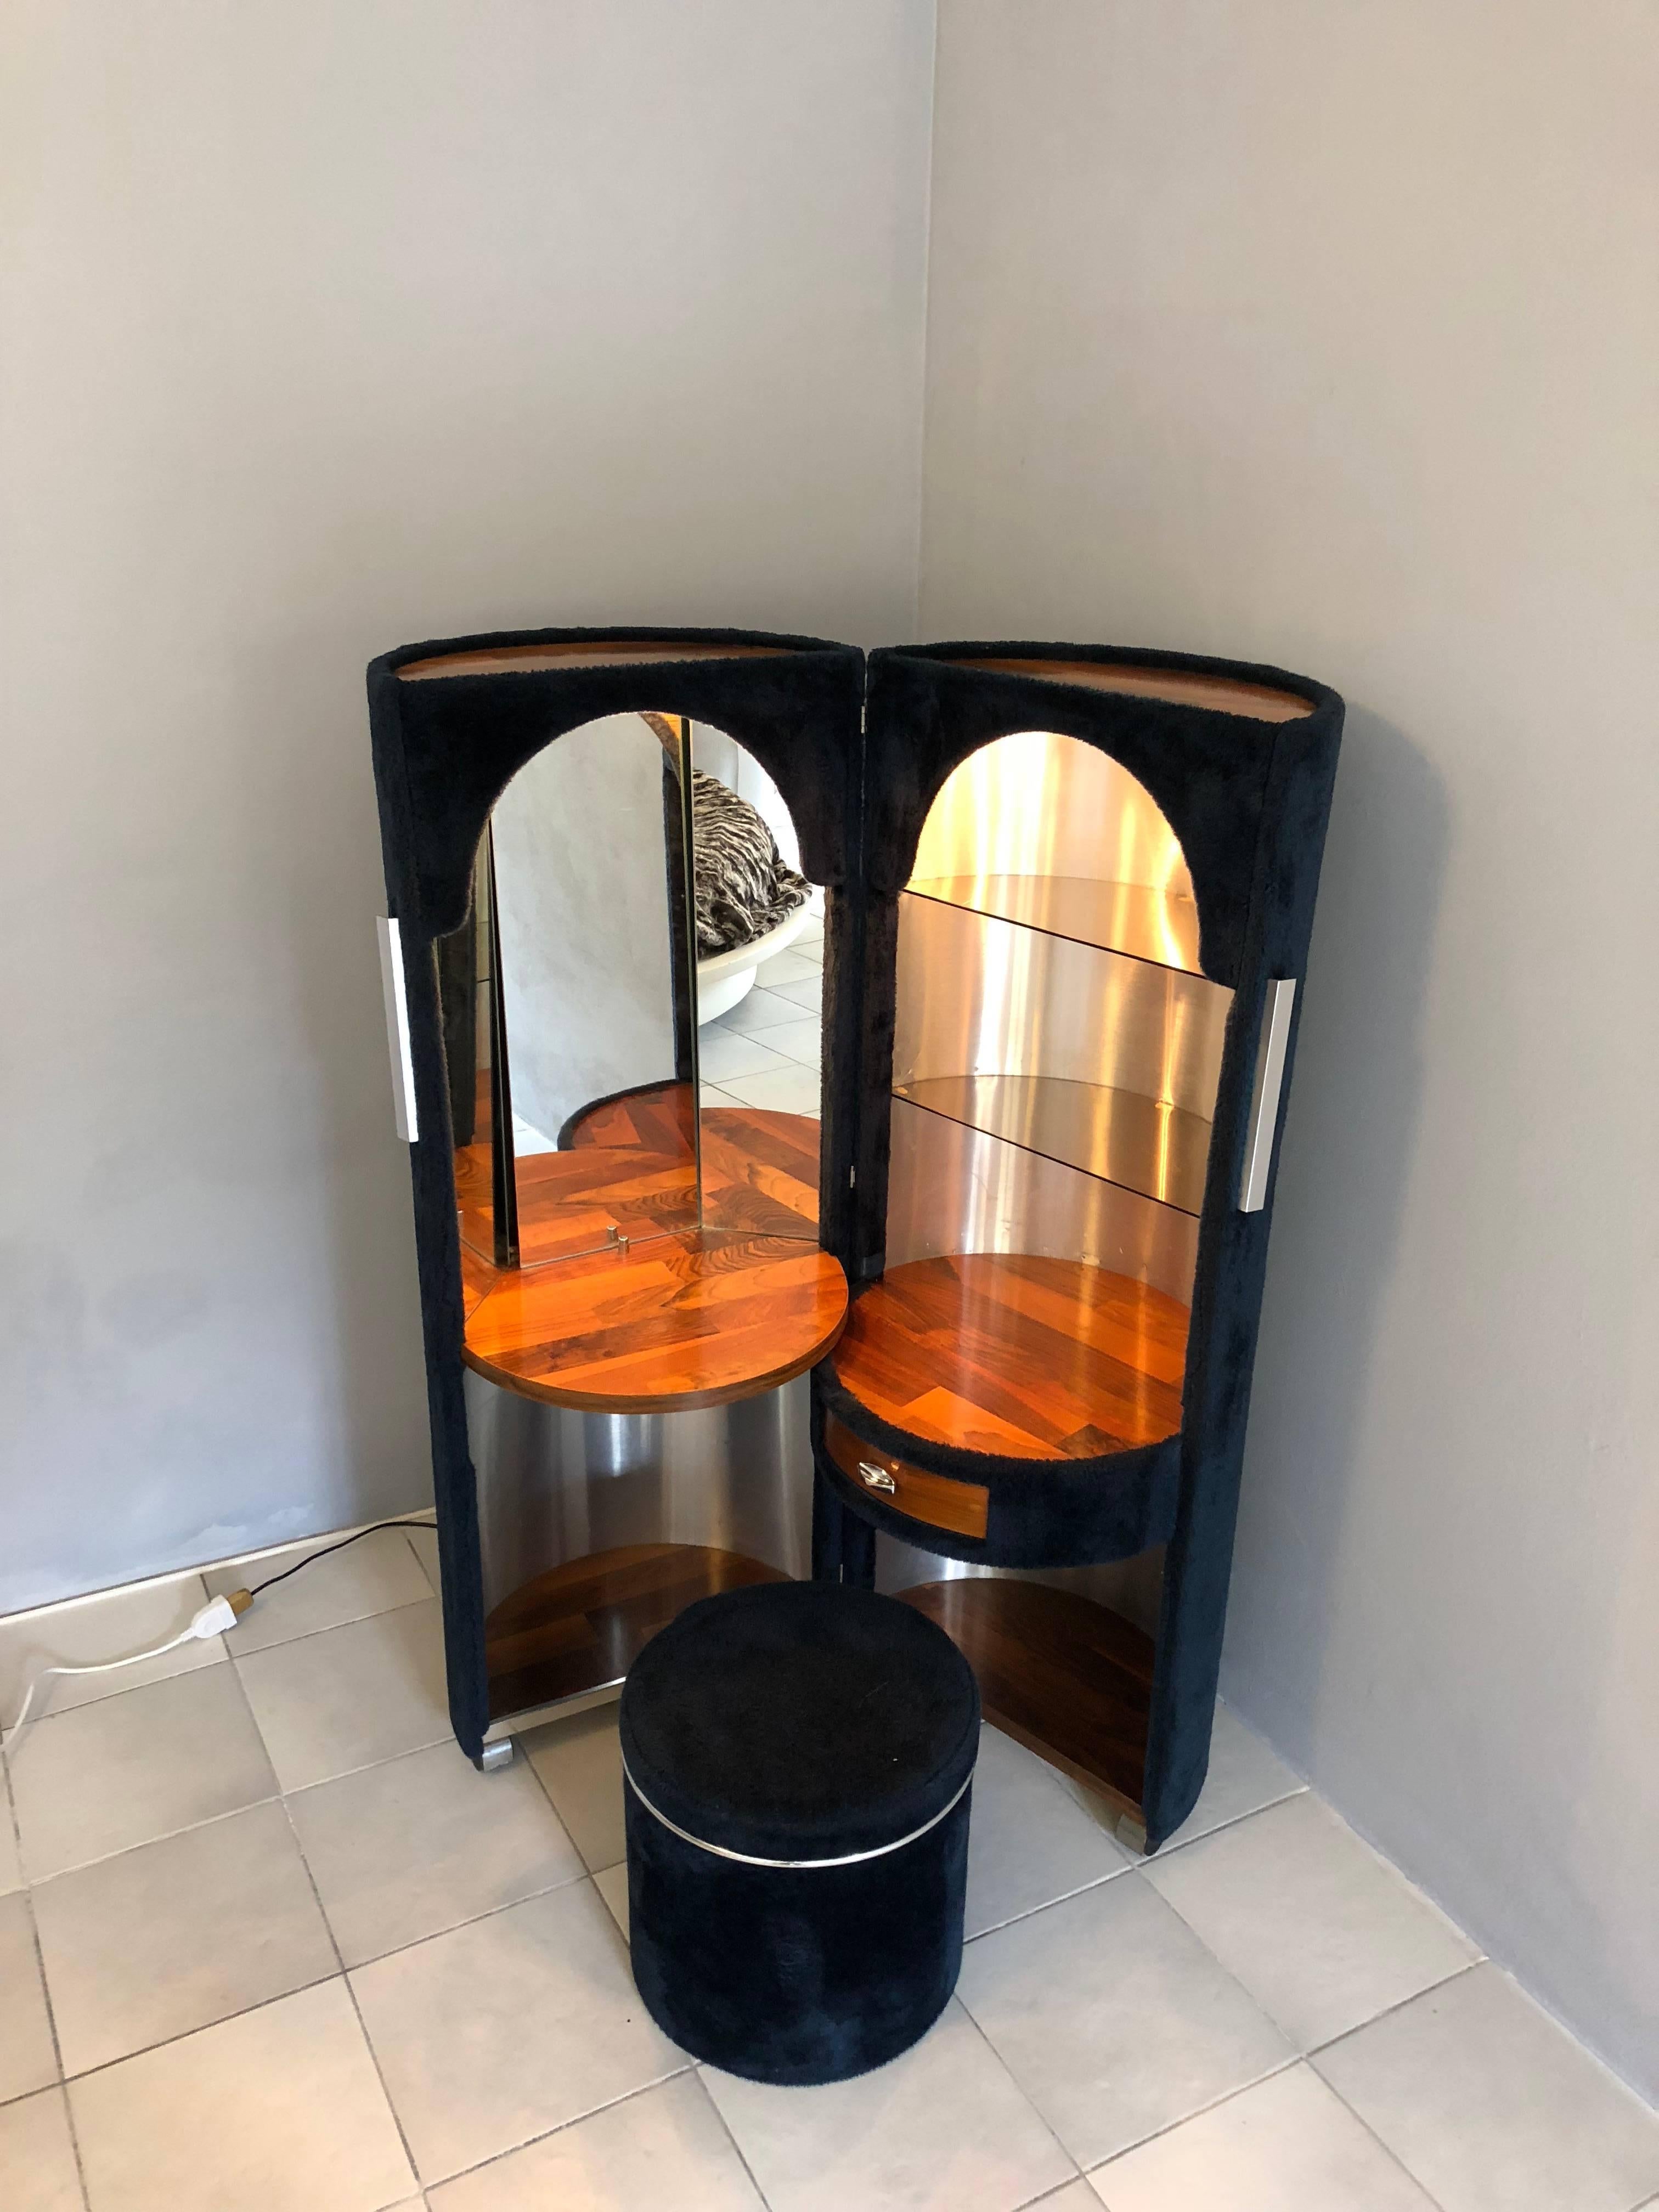 Wonderful Poltrona Frau blue faux fur dressing table designed by Luigi Massoni in the 1970s. It features a cylindrical shape that folds out in two split cylinders lined with synthetic blue faux fur on wheels and a retractable stool inside the shape